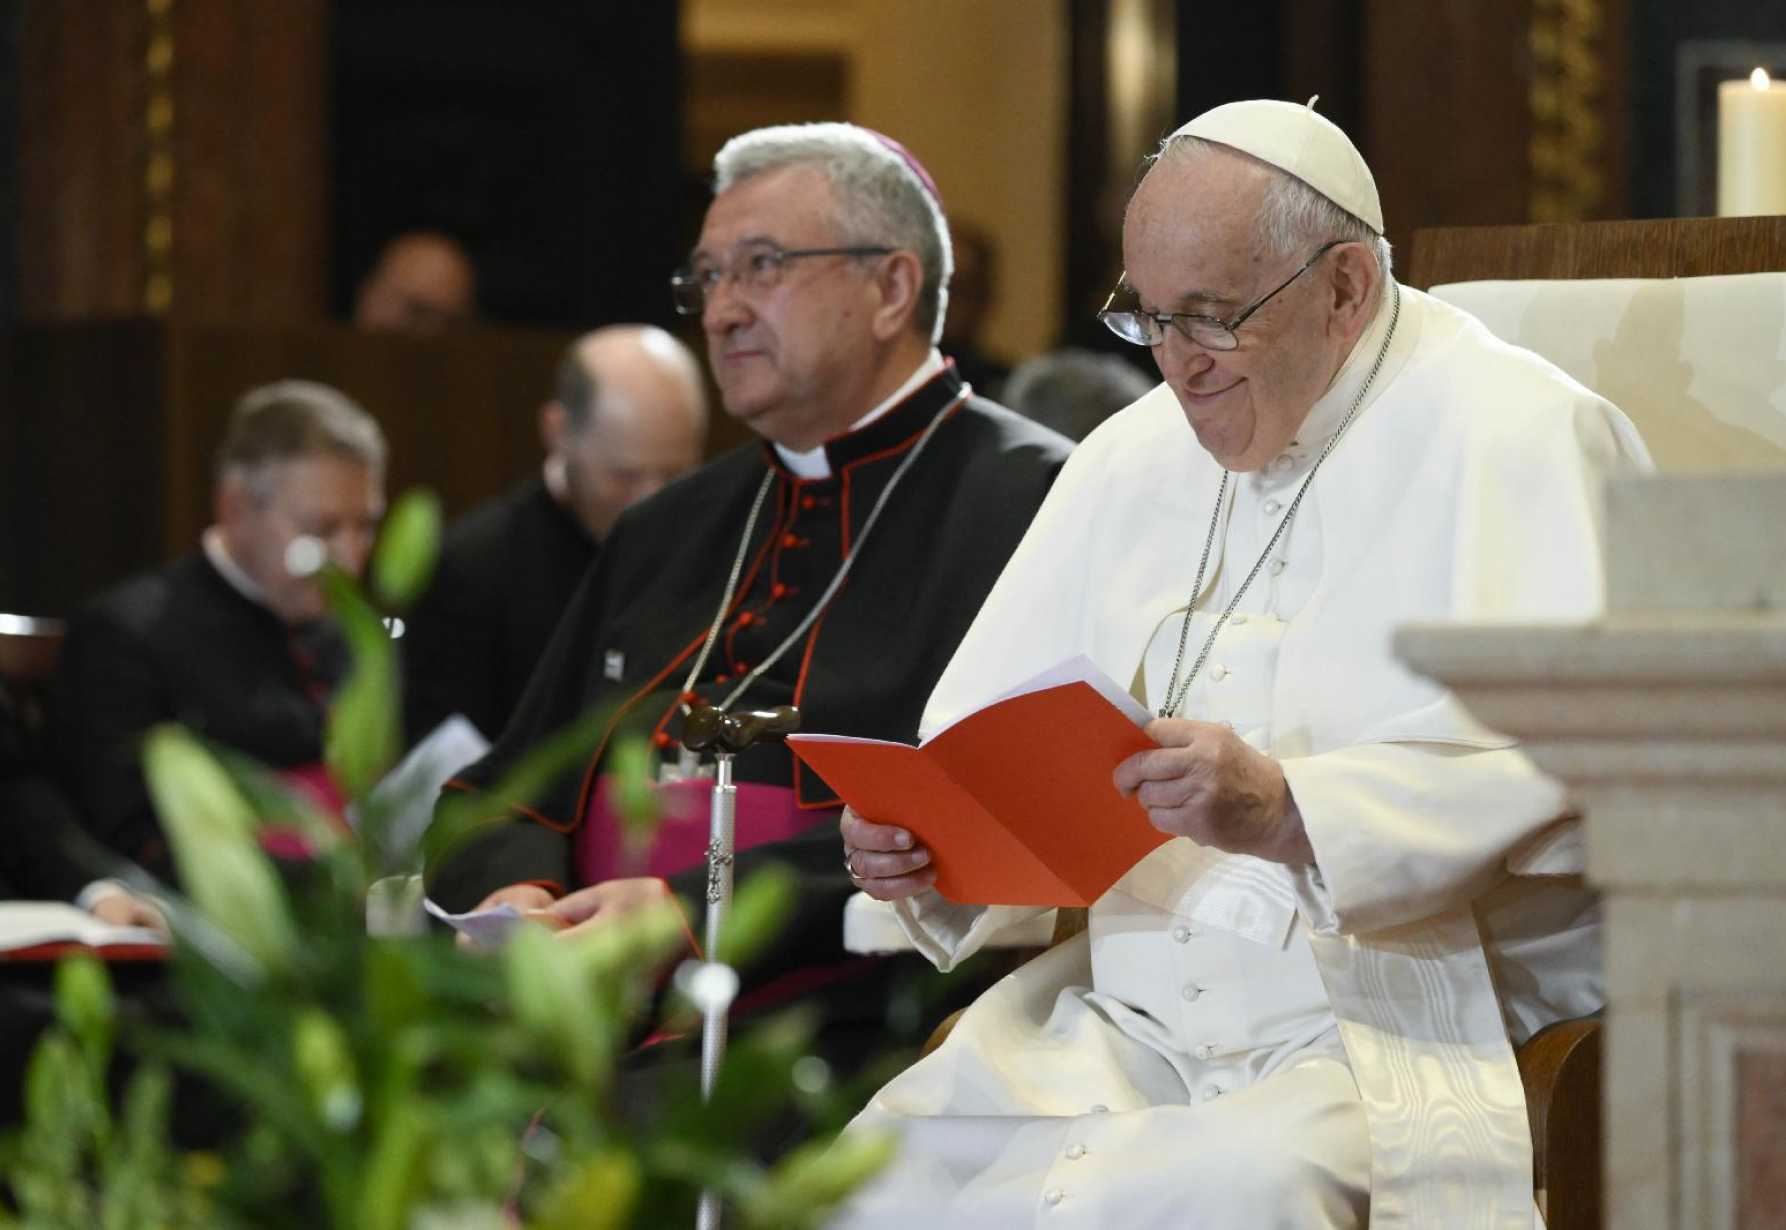 Recognize God at work in the world, pope tells Hungarian clergy, religious